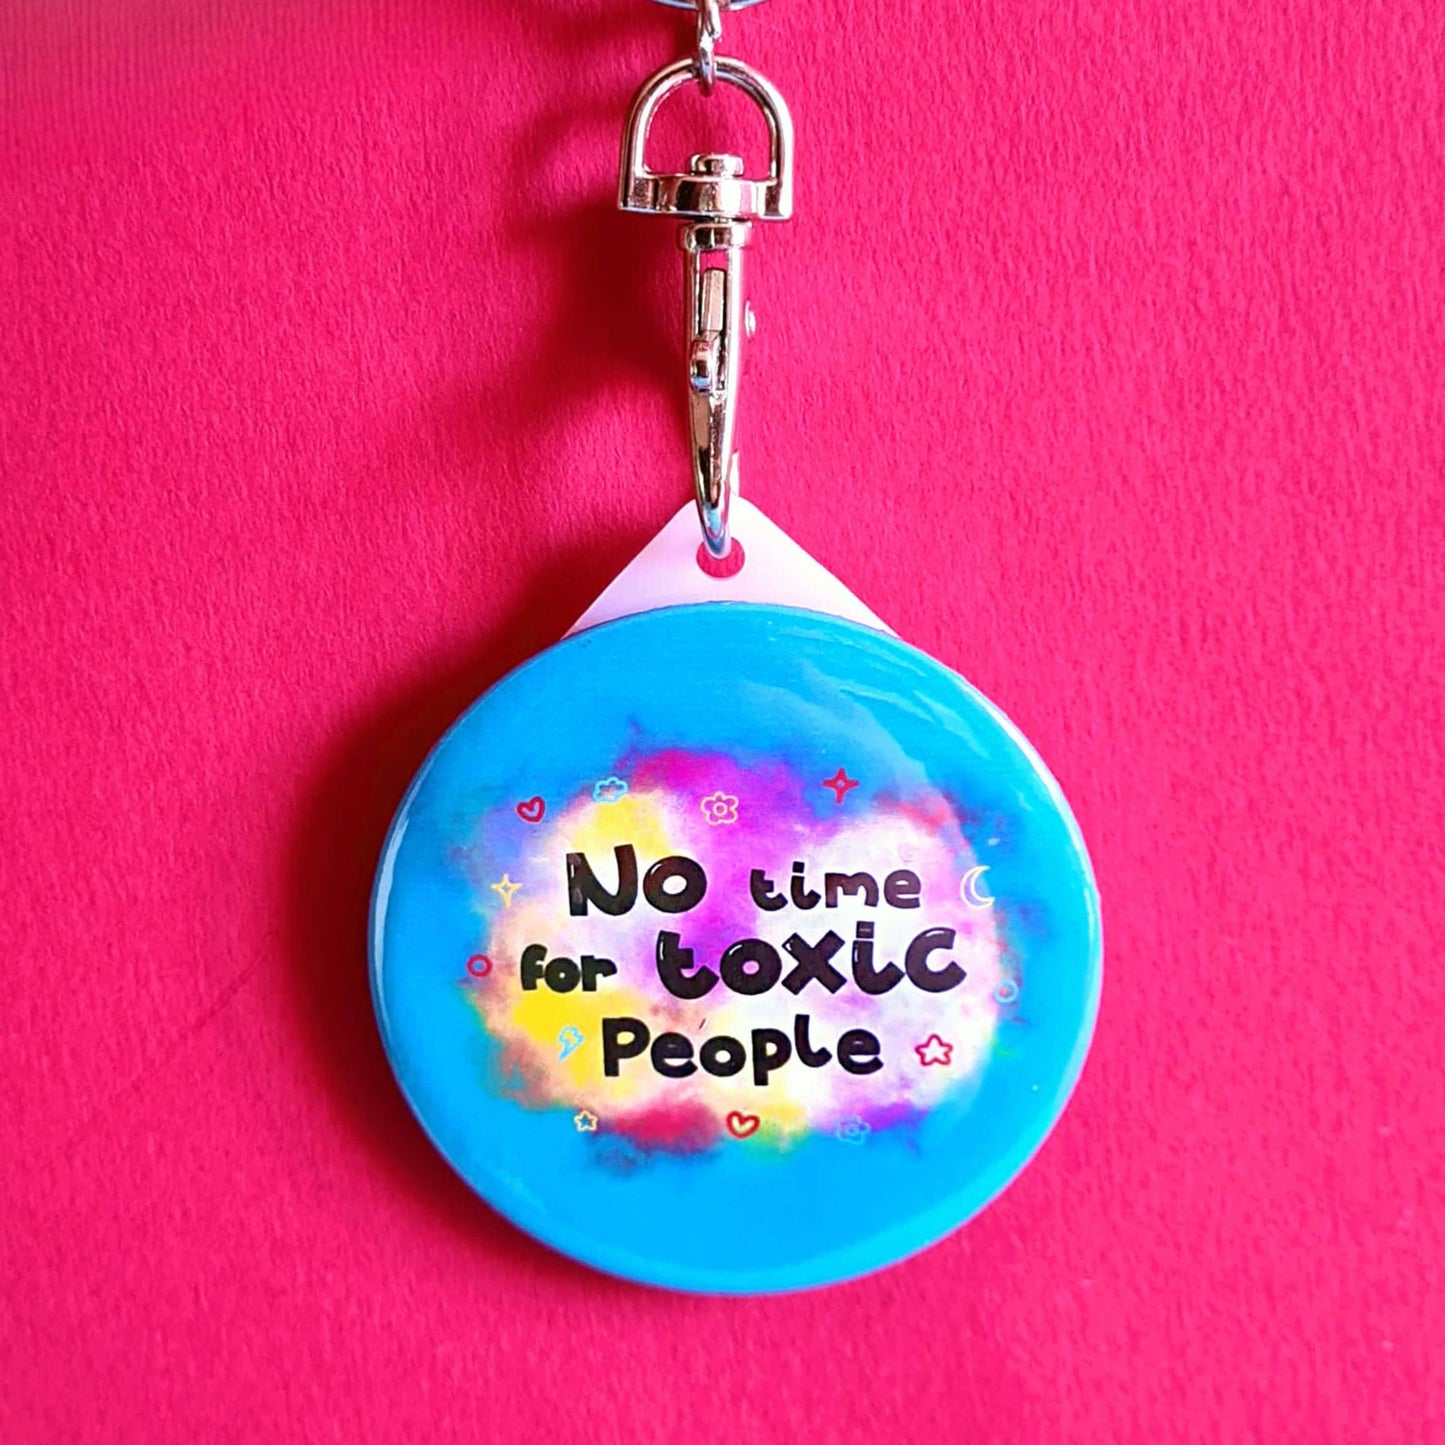 The No Time For Toxic People Keyring on a red background. The silver lobster clip blue plastic circular keychain has yellow and pink clouds with black text reading 'no time for toxic people' with red, yellow, and blue hearts, clouds, sparkles, moons and flowers.